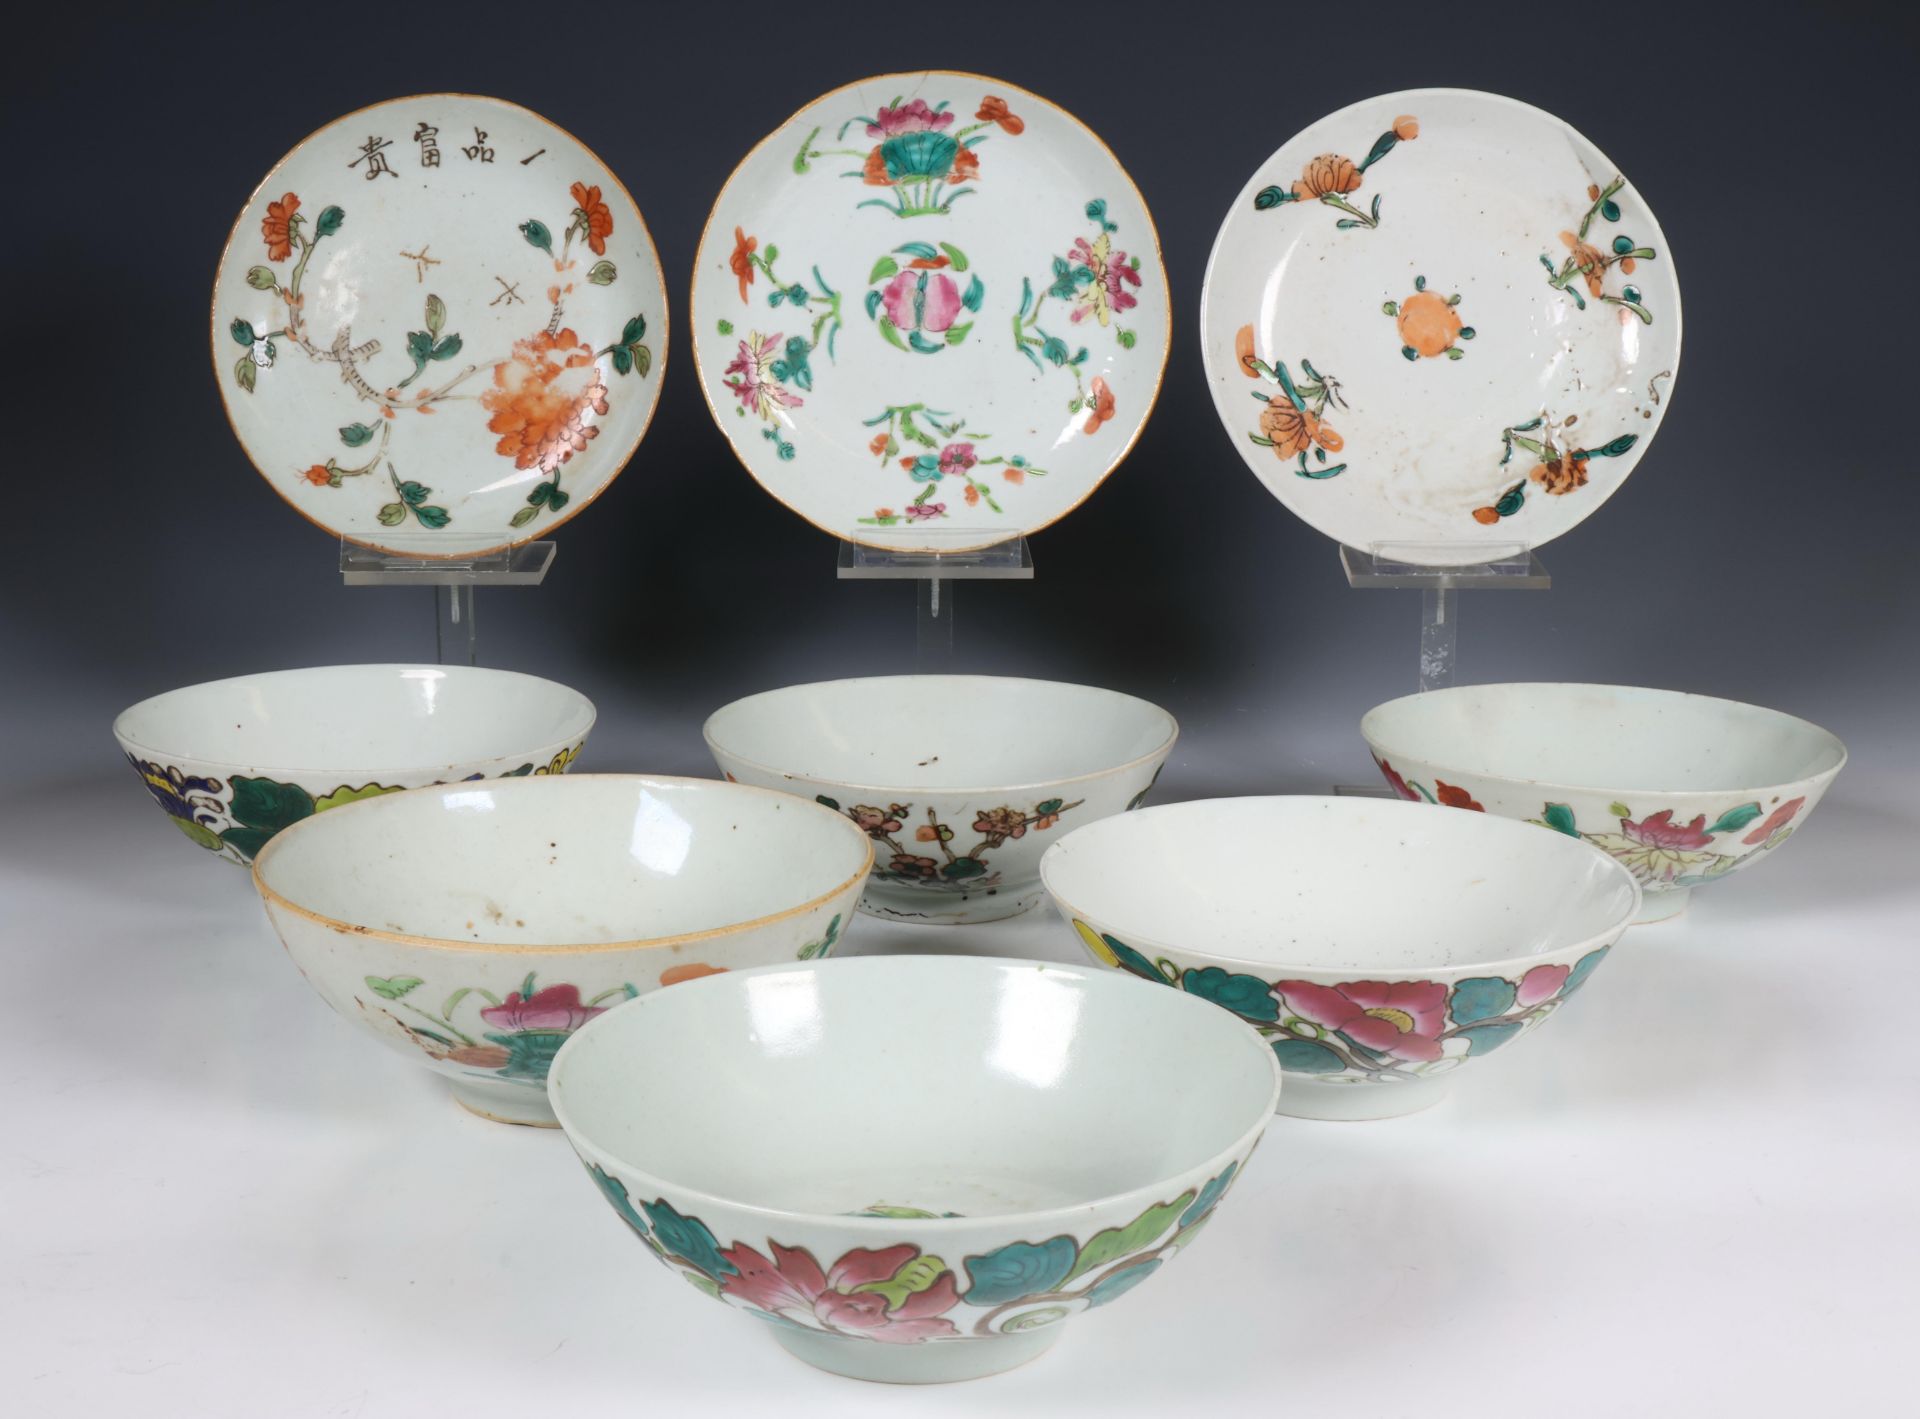 China, collection of famille rose porcelain bowls and saucers, 20th century,